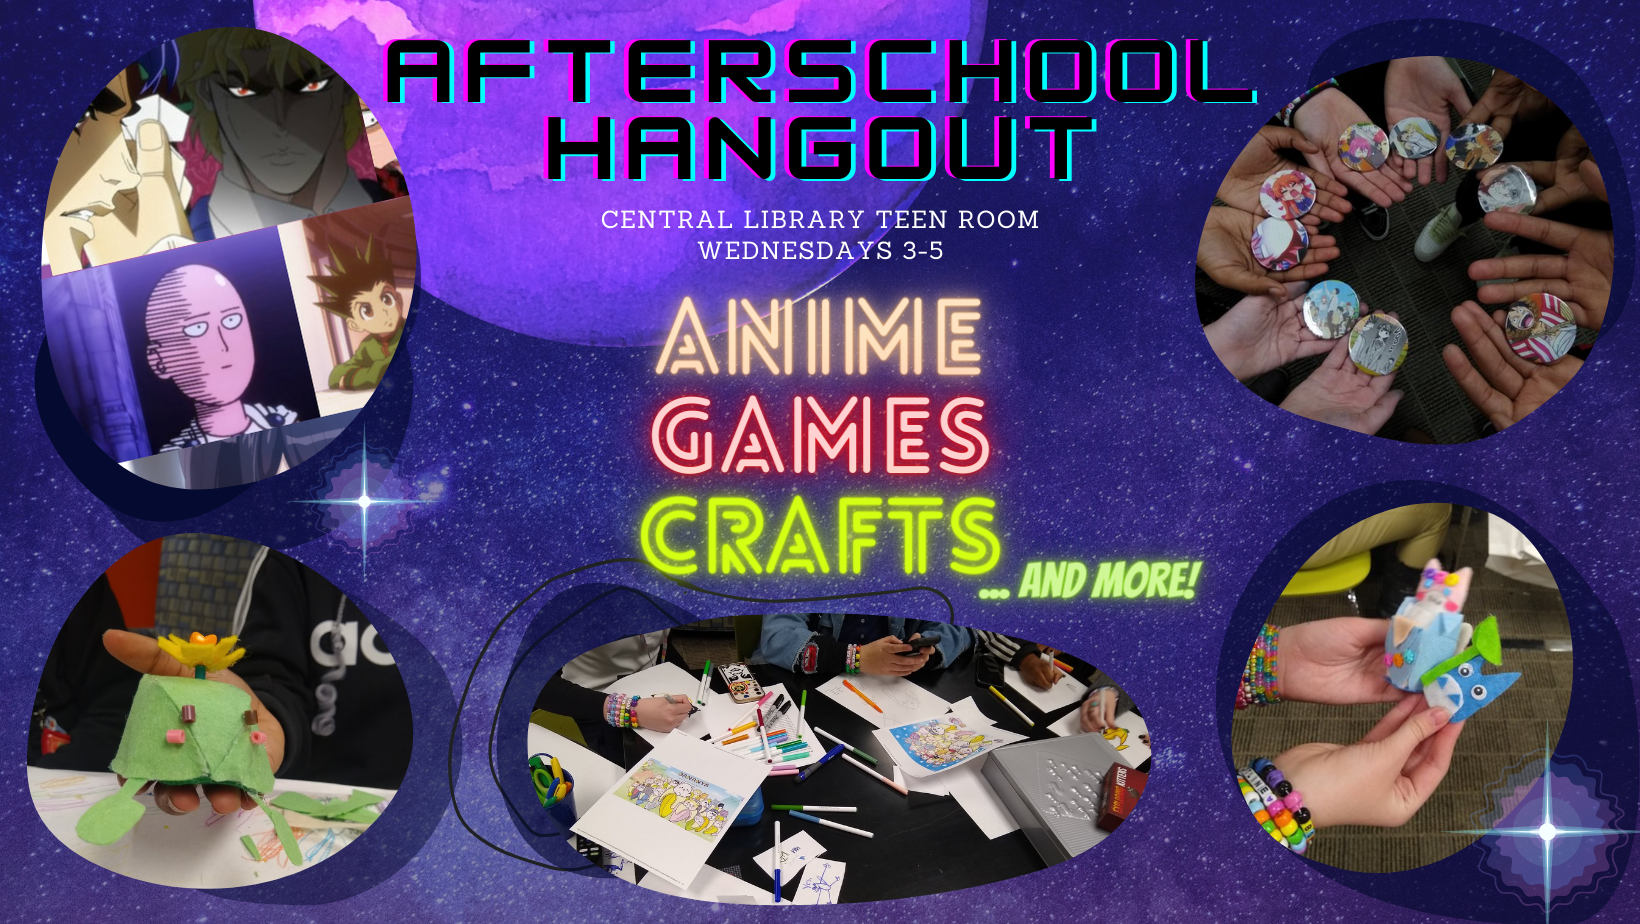 "Anime games crafts" on purple background with 5 images of various crafts